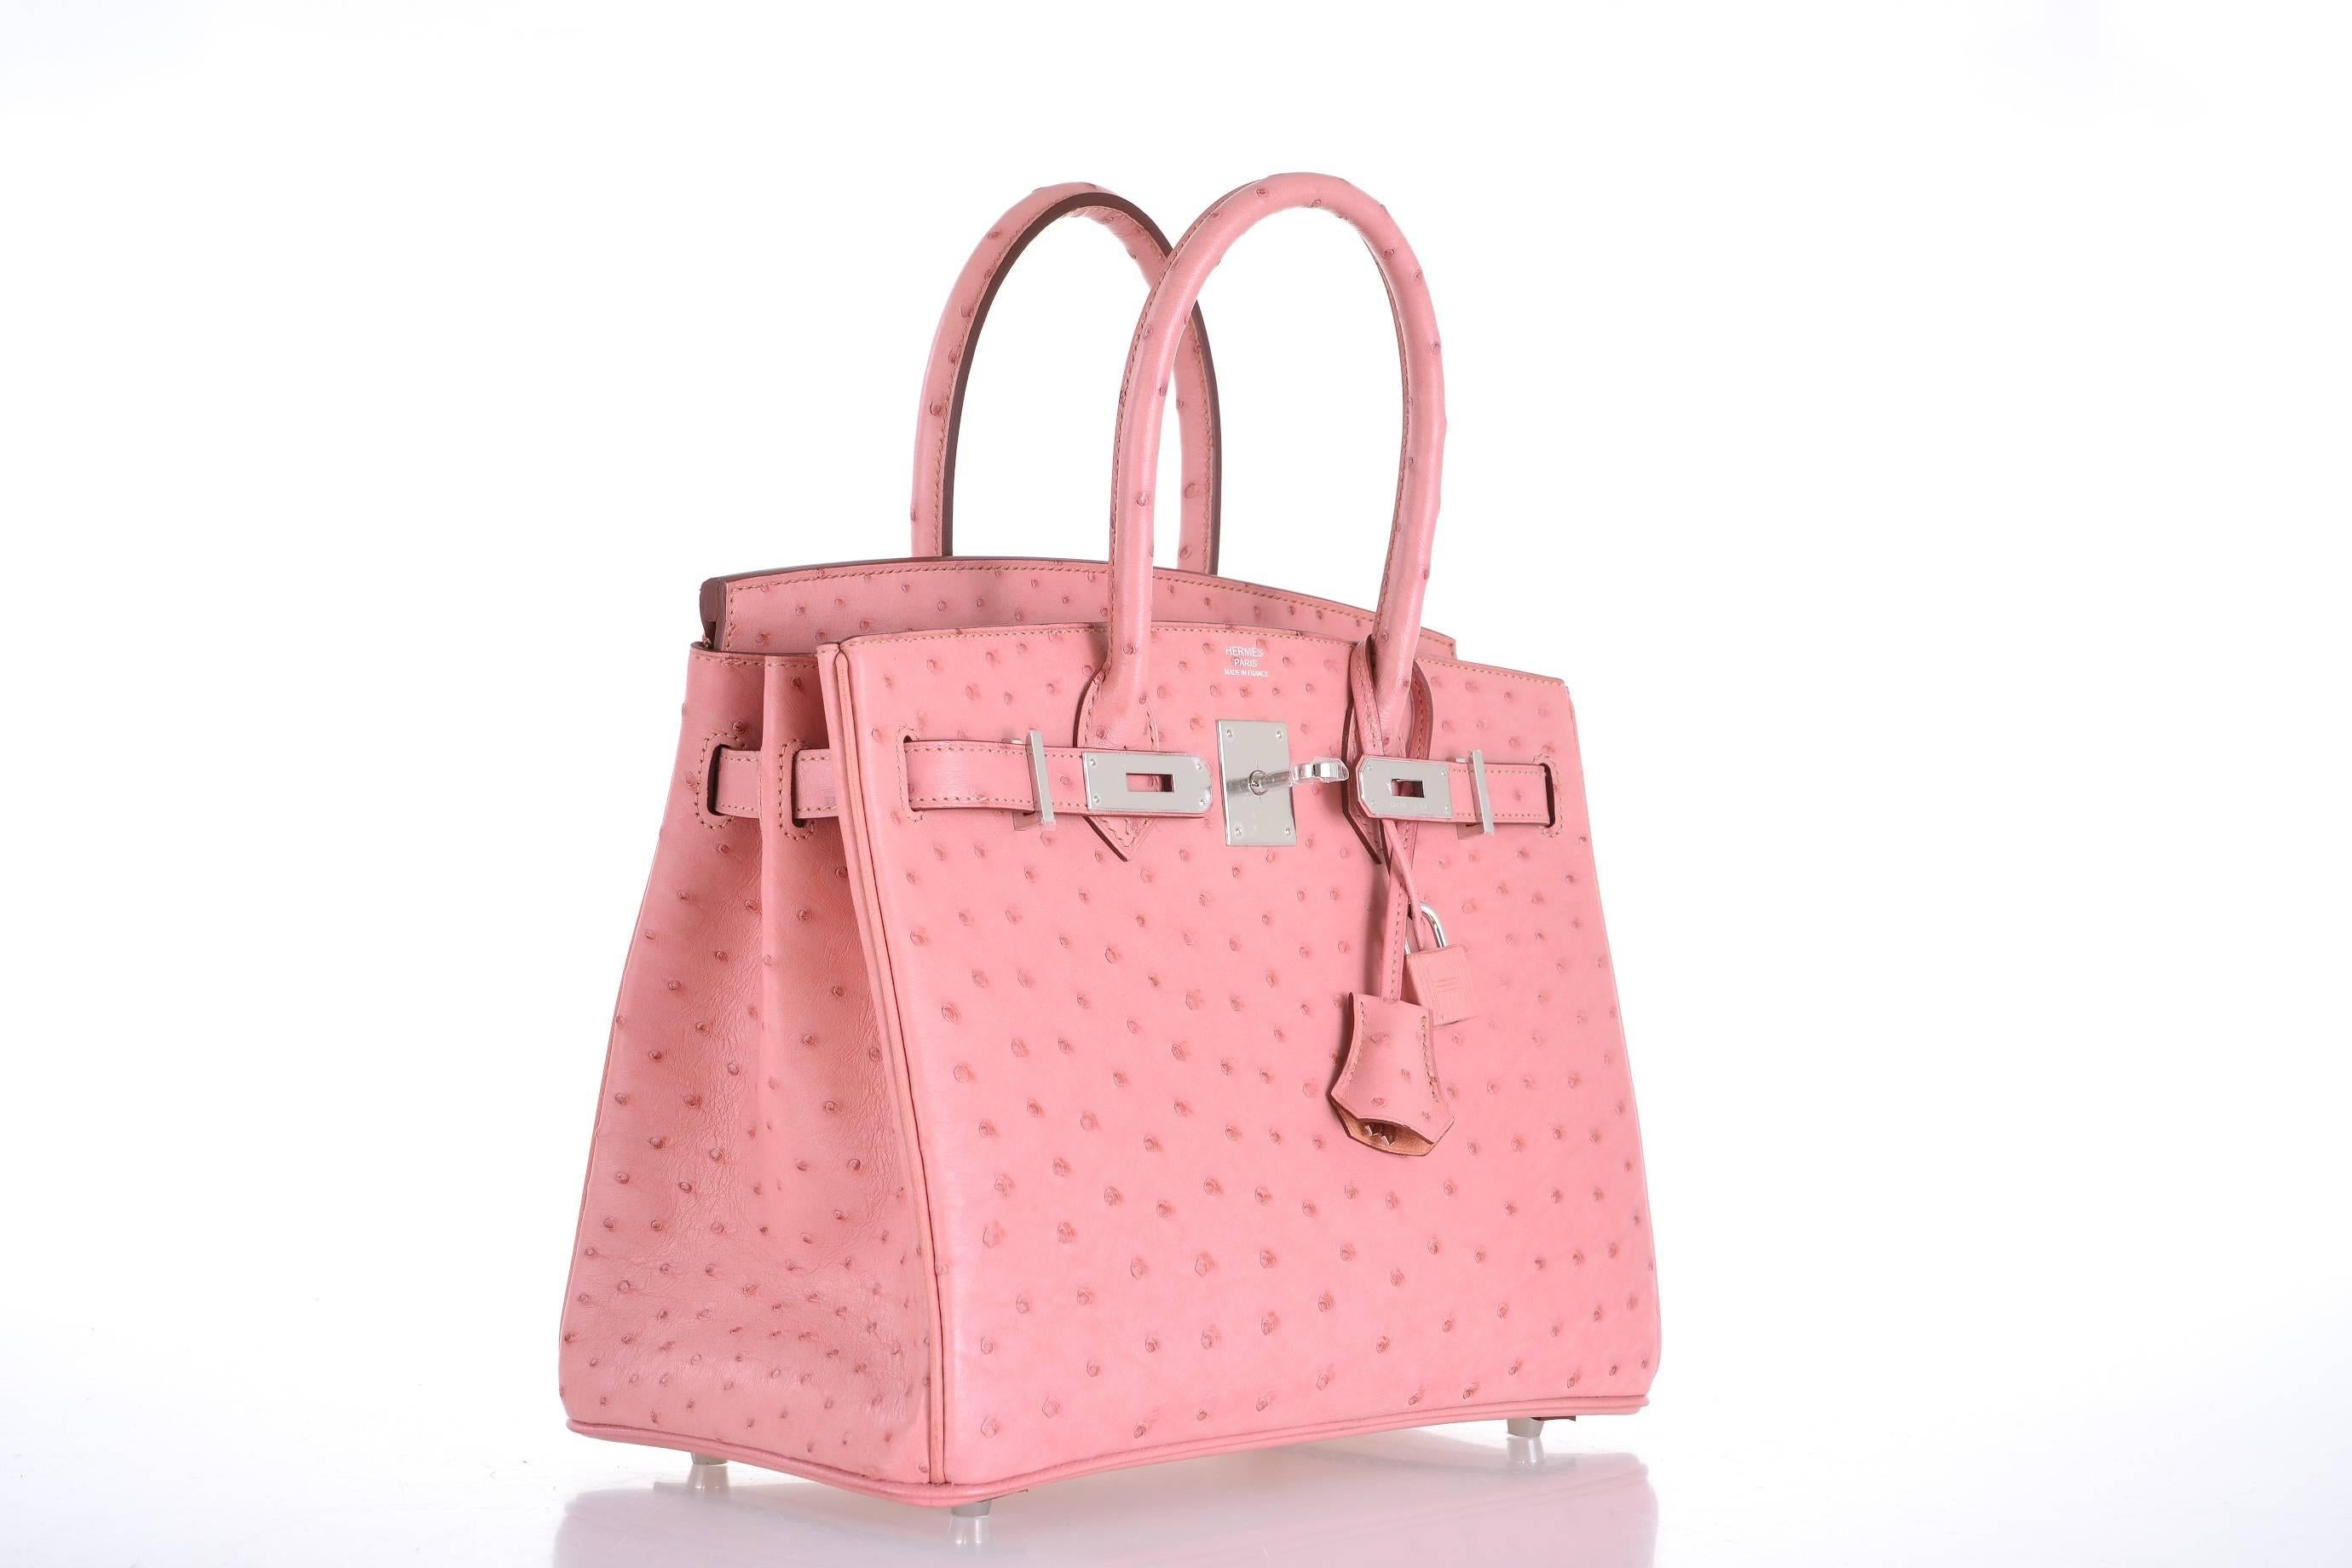 As Always, Another One Of My Fab Finds!
Hermes Insane New Color Terre Cuite Ostrich Leather Birkin With Gold Hardware.

THE MOST AMAZING NEW SOPHISTICATED PINK OSTRICH WITH PALLADIUM HARDWARE.
STAMP T. COMES WITH CITES AND ALL THE ACCESSORIES.